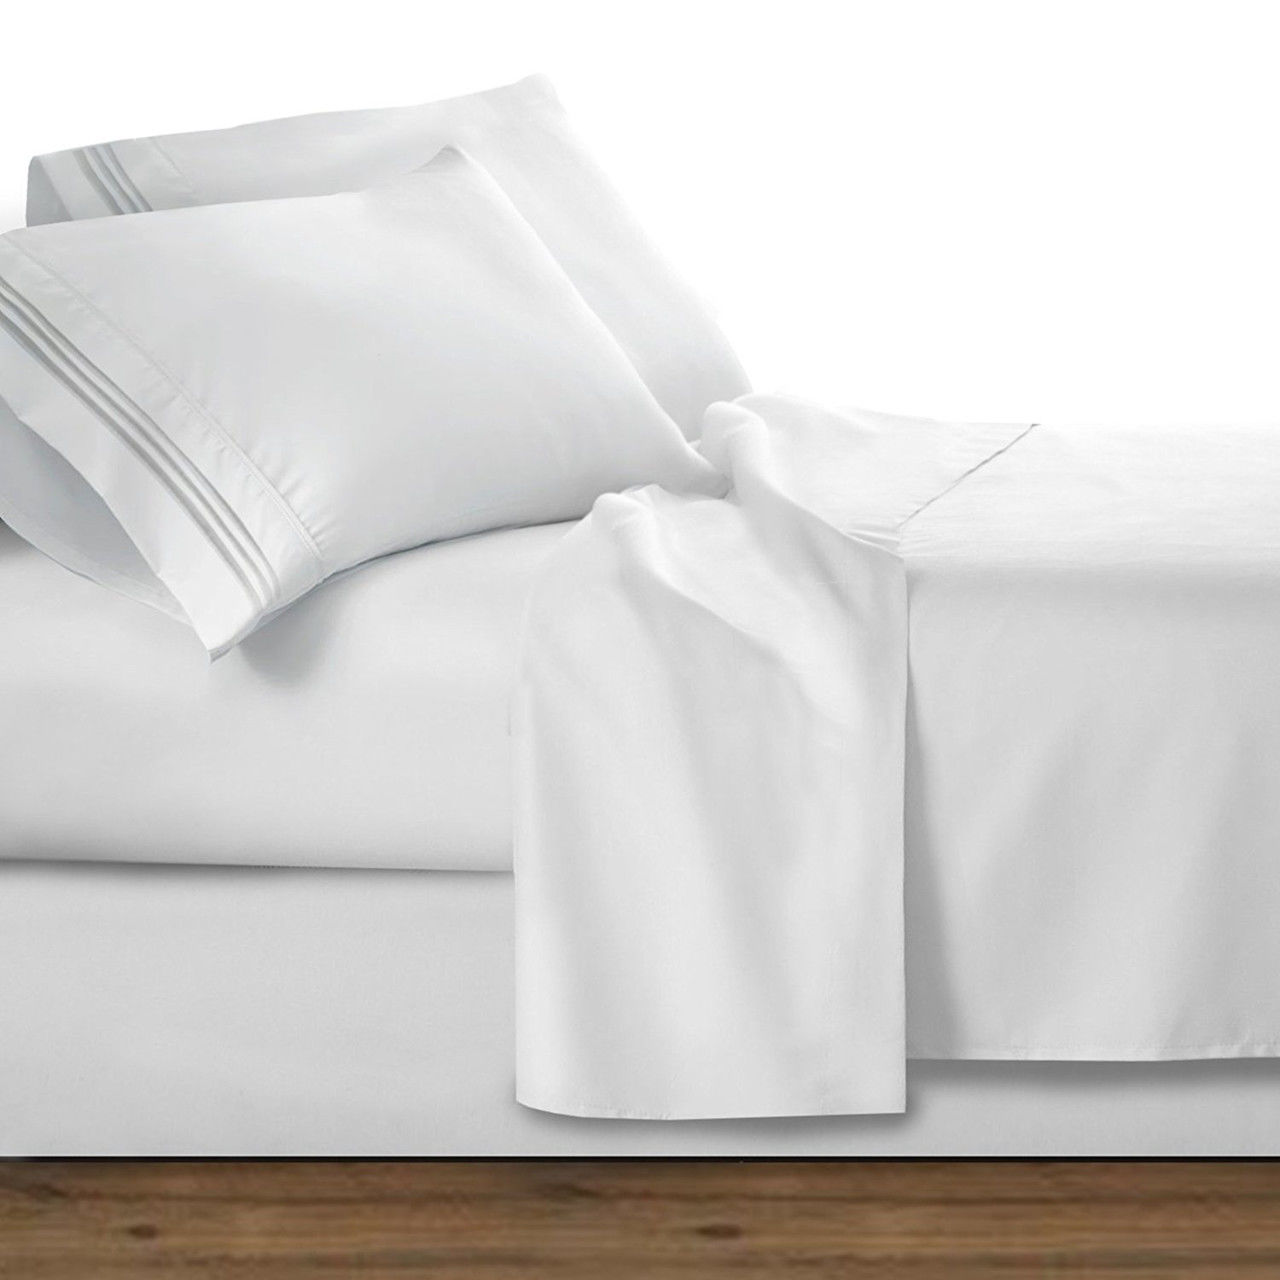 Does the microfiber blend in bed frames offer double brushed qualities?